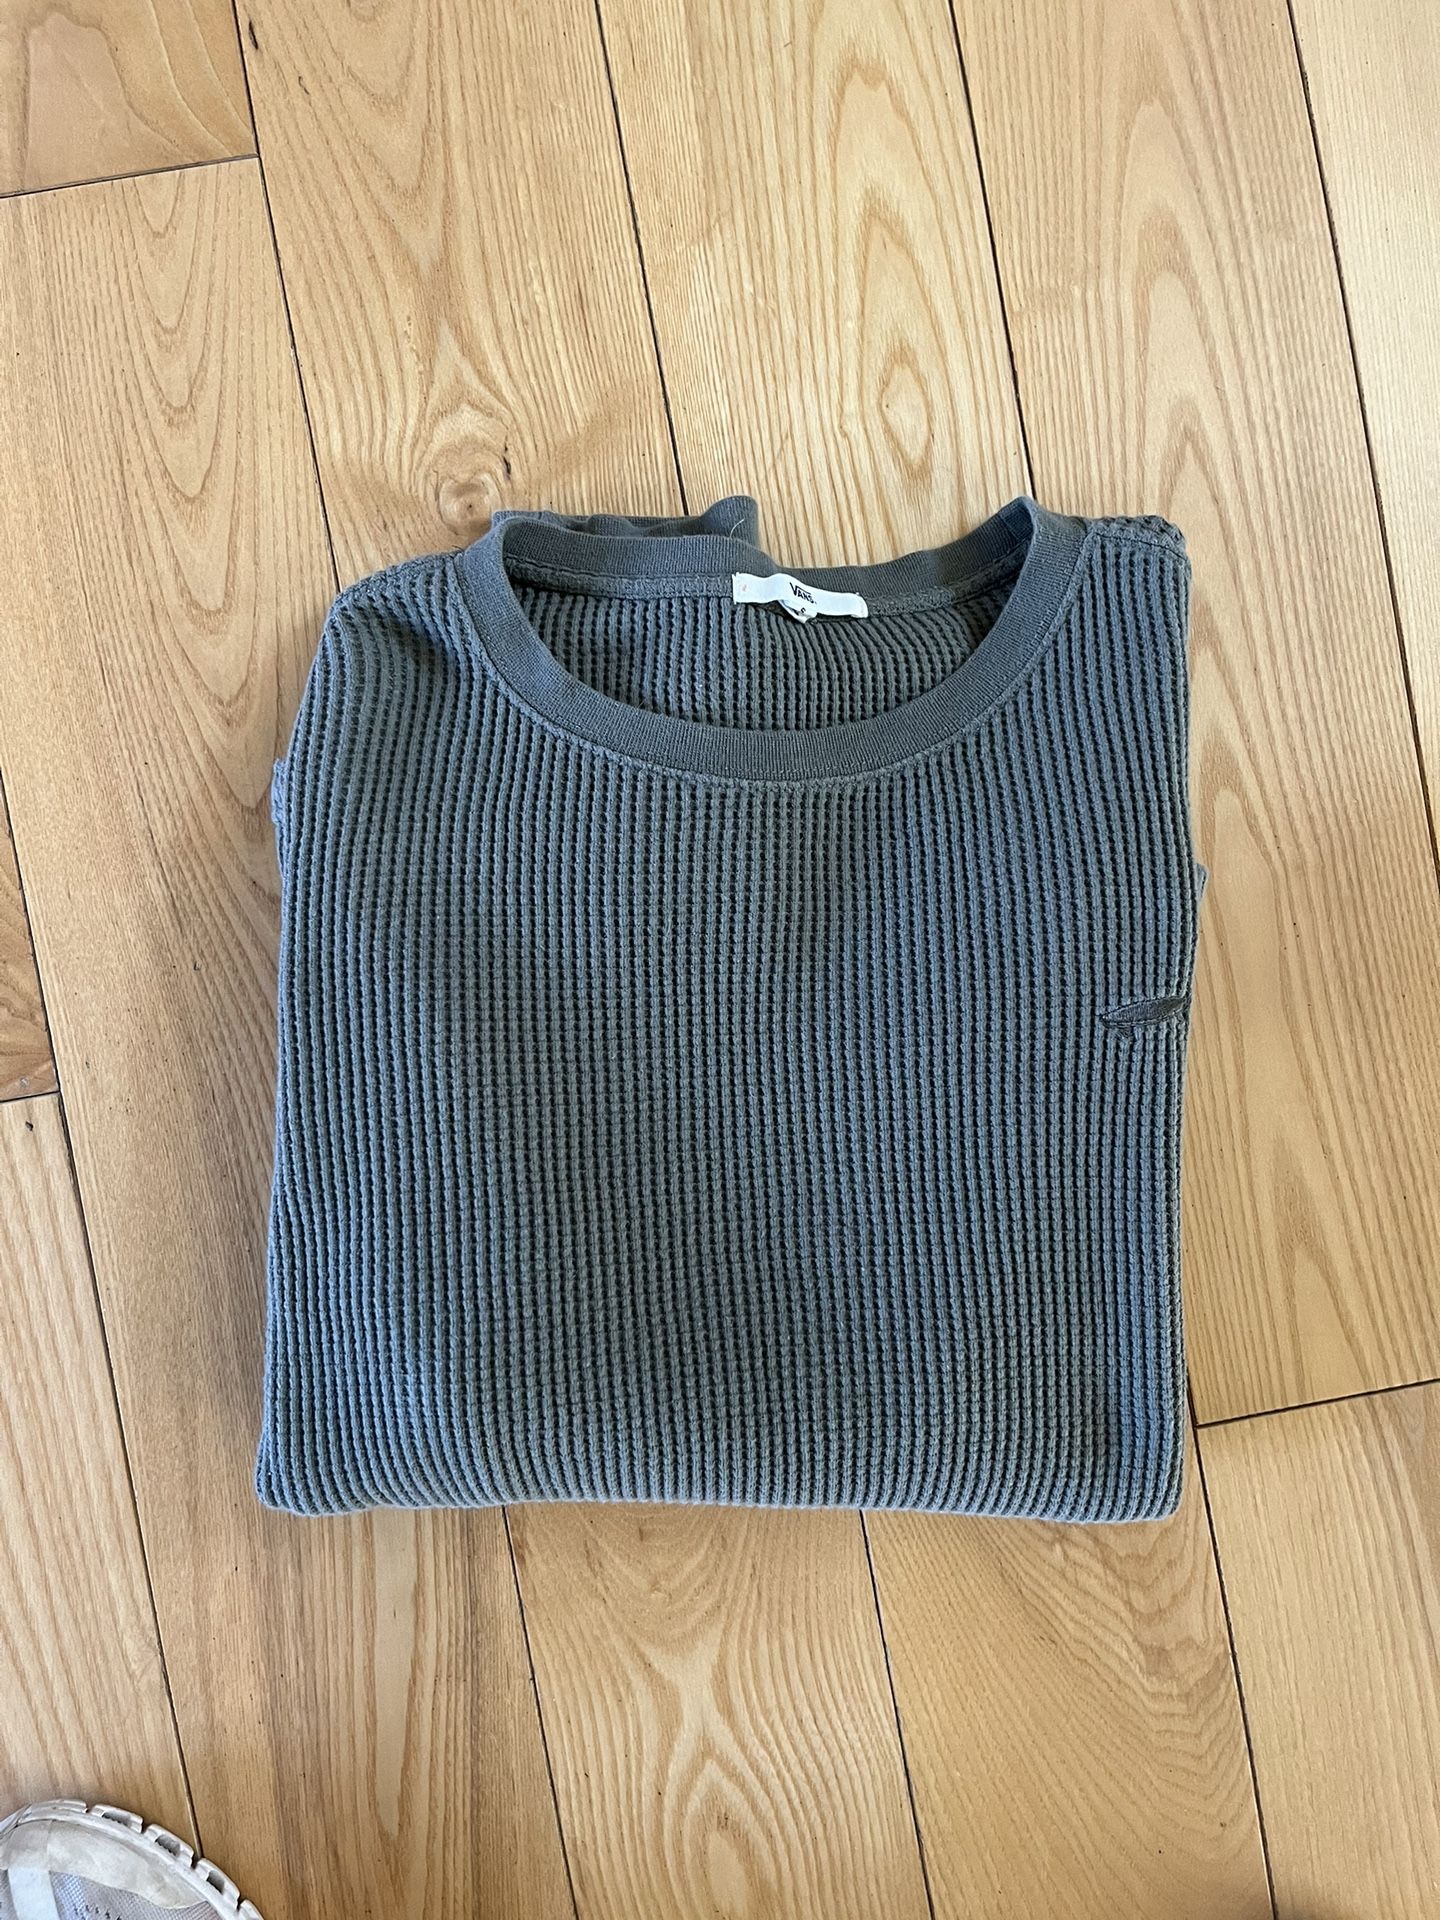 Vans Womans Olive Thermal Shirt In Size Small